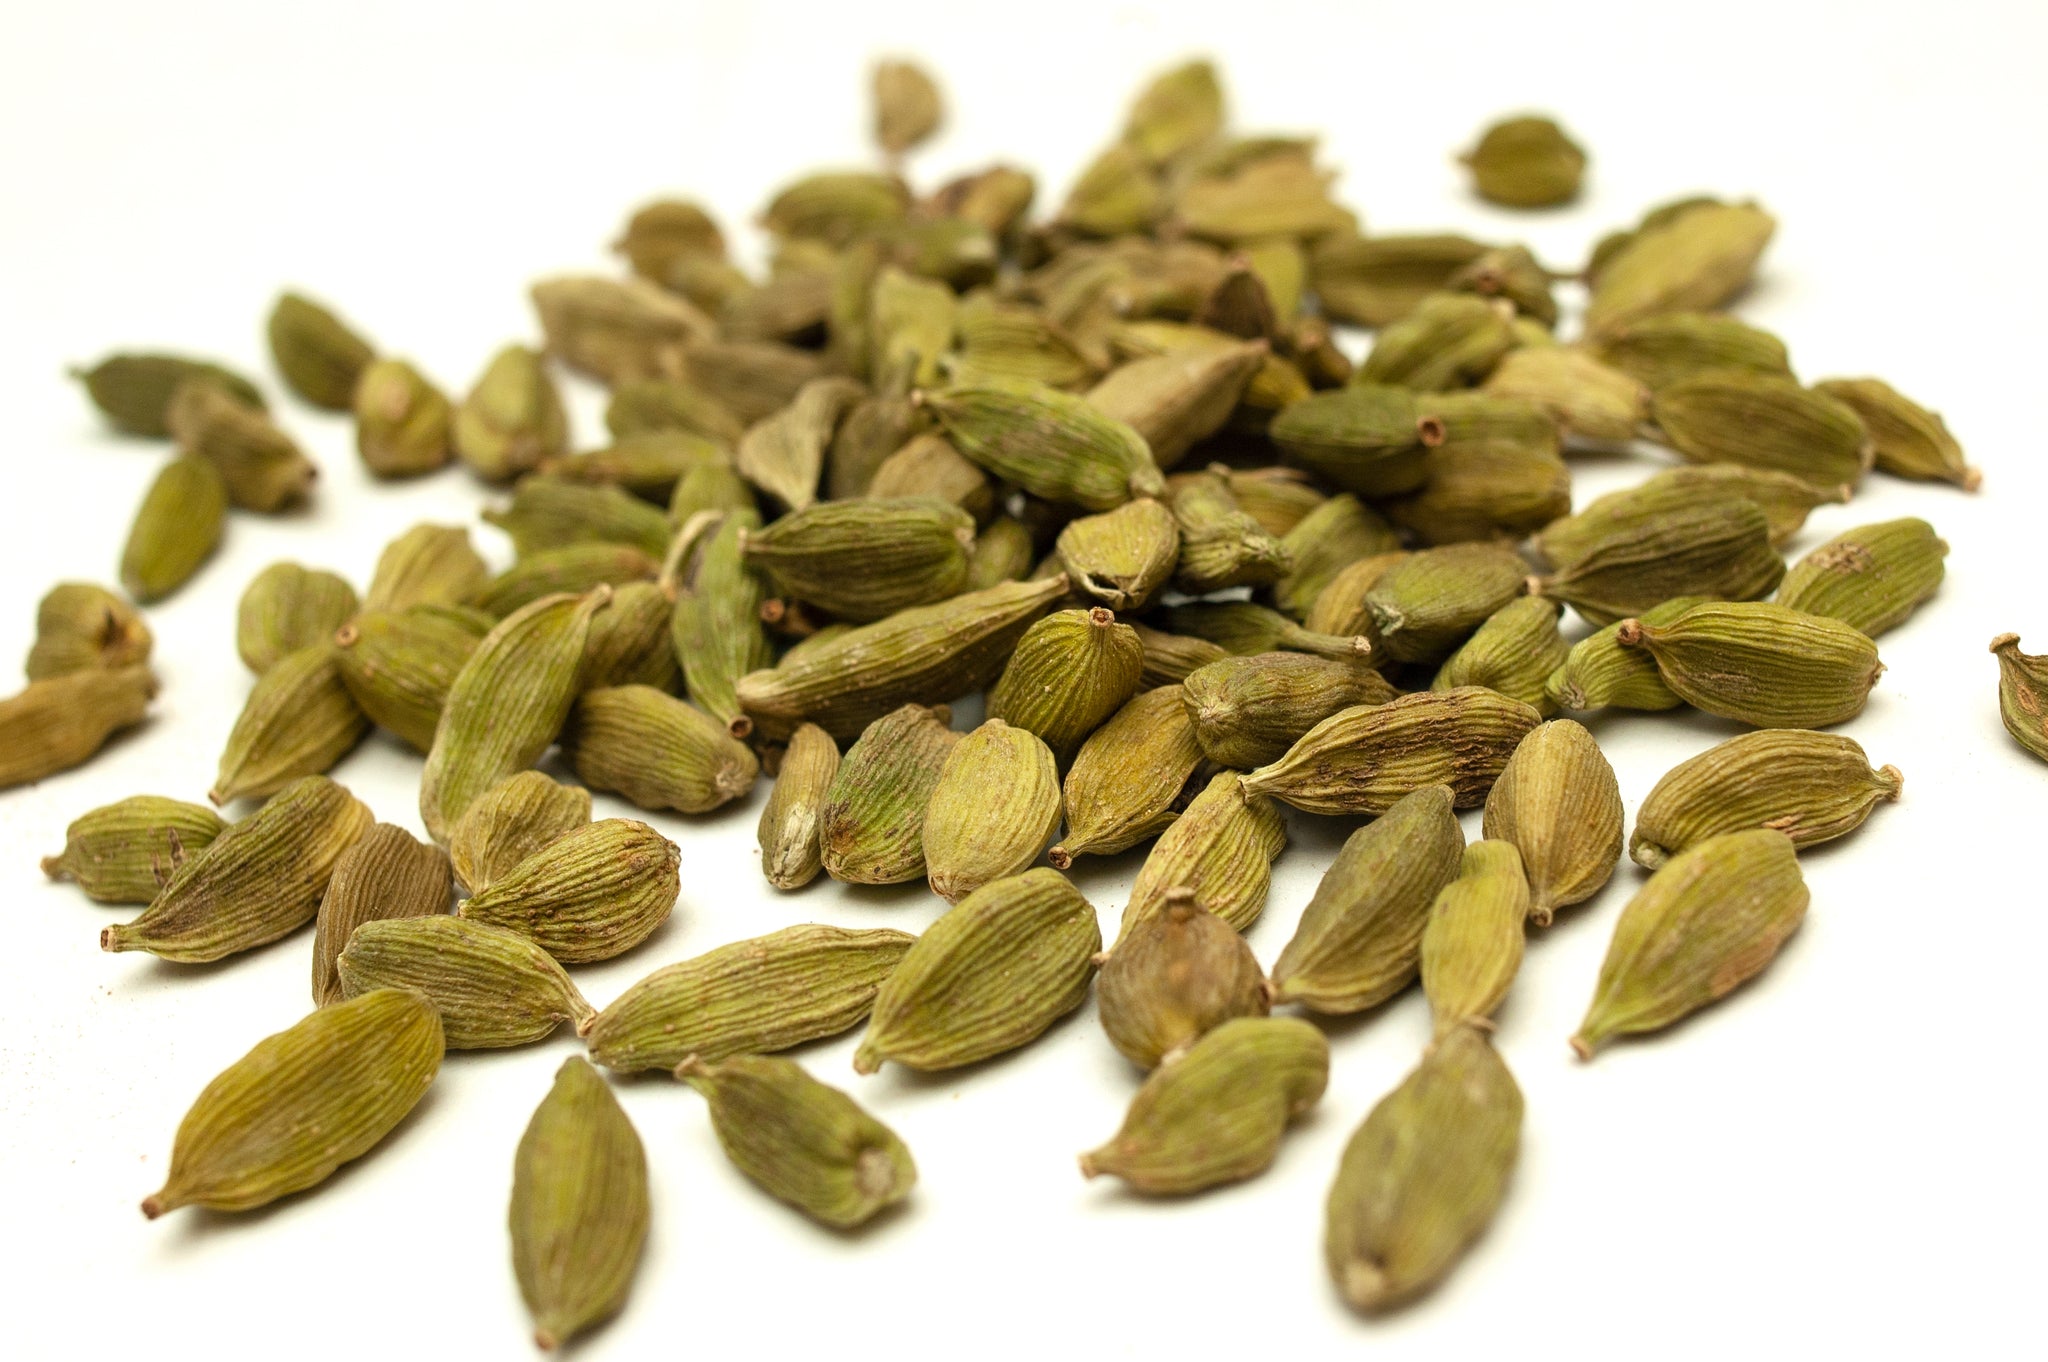 Fresh green cardamom pods, delicious added to baking, curries, desserts and of course a key ingredient in traditional chai blends.